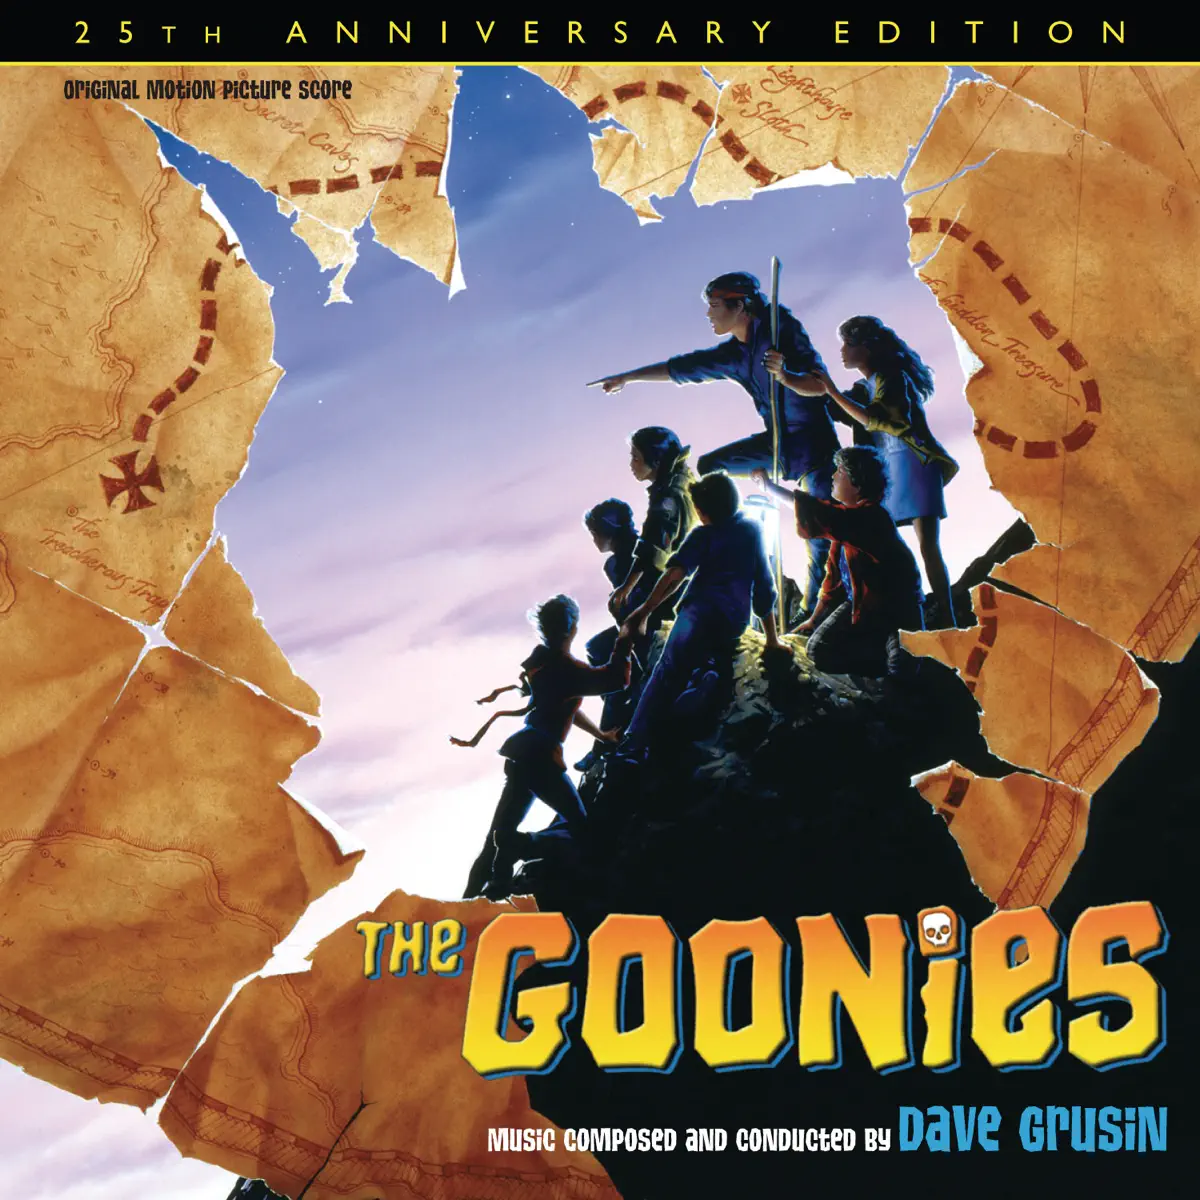 Dave Grusin - 七宝奇谋 The Goonies: 25th Anniversary Edition (Original Motion Picture Score) (2010) [iTunes Plus AAC M4A]-新房子